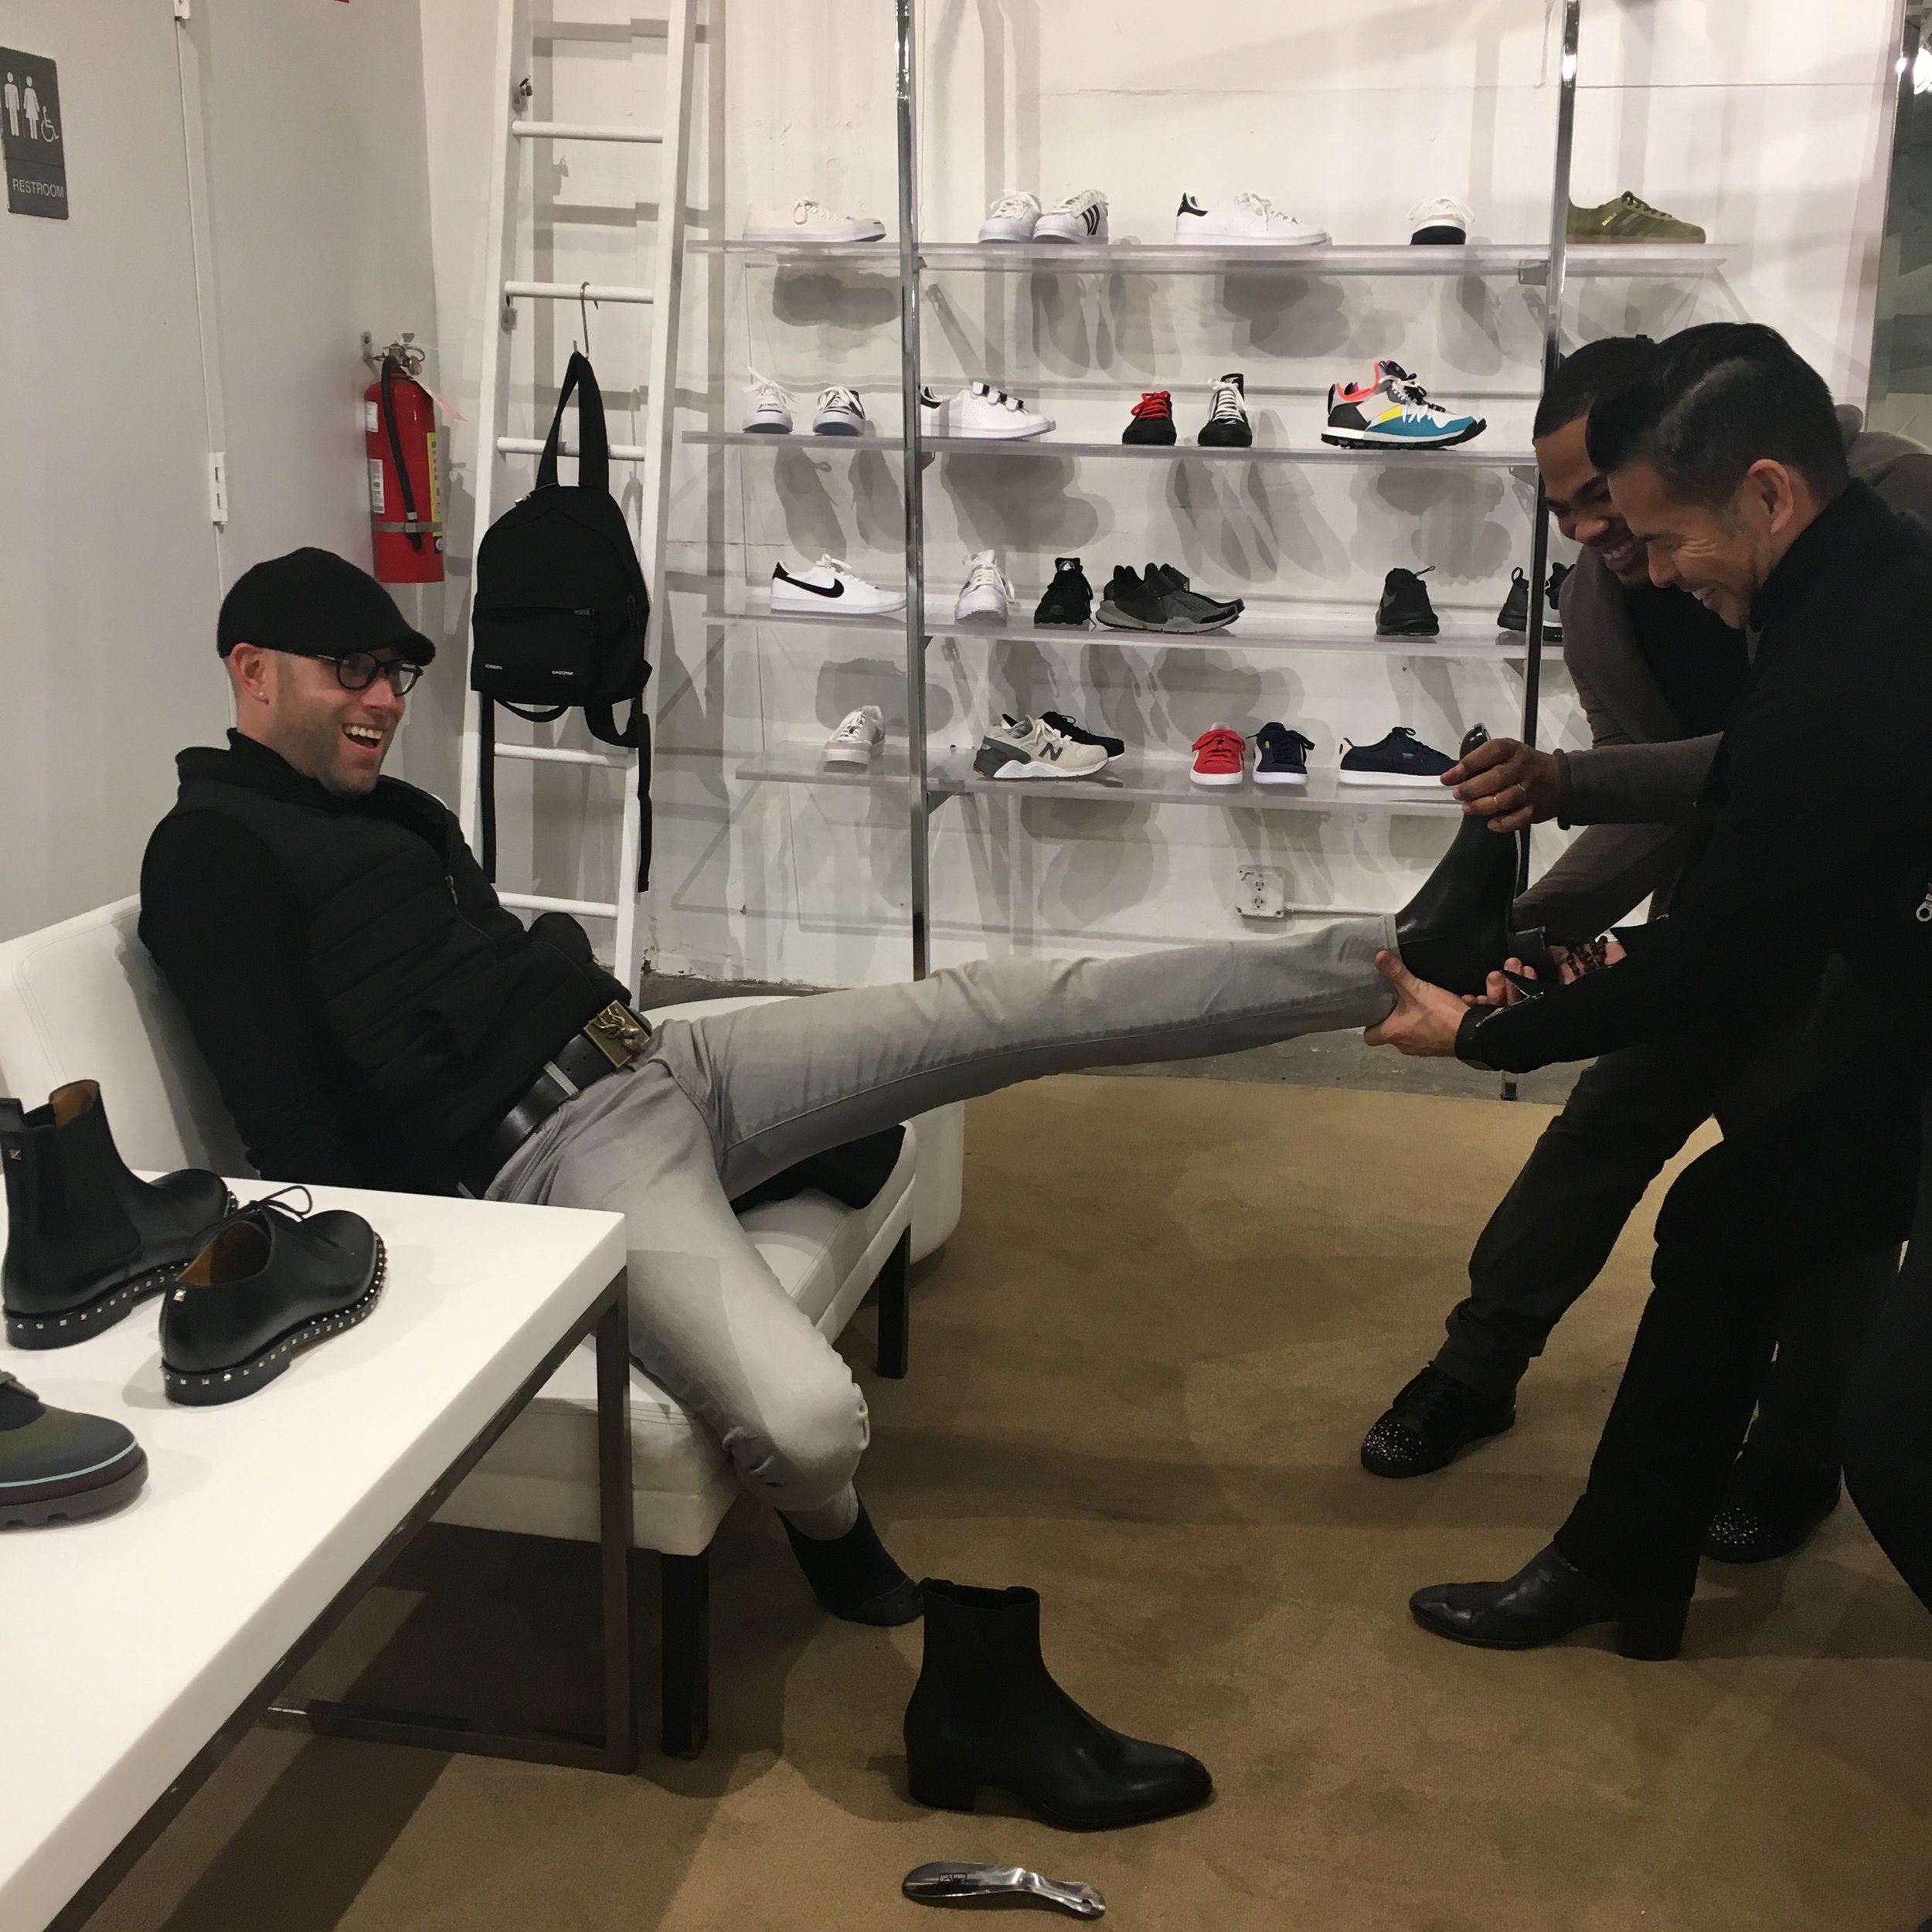 Alex needed assistance taking off the Saint Laurent boots he was trying on at Jeffrey.